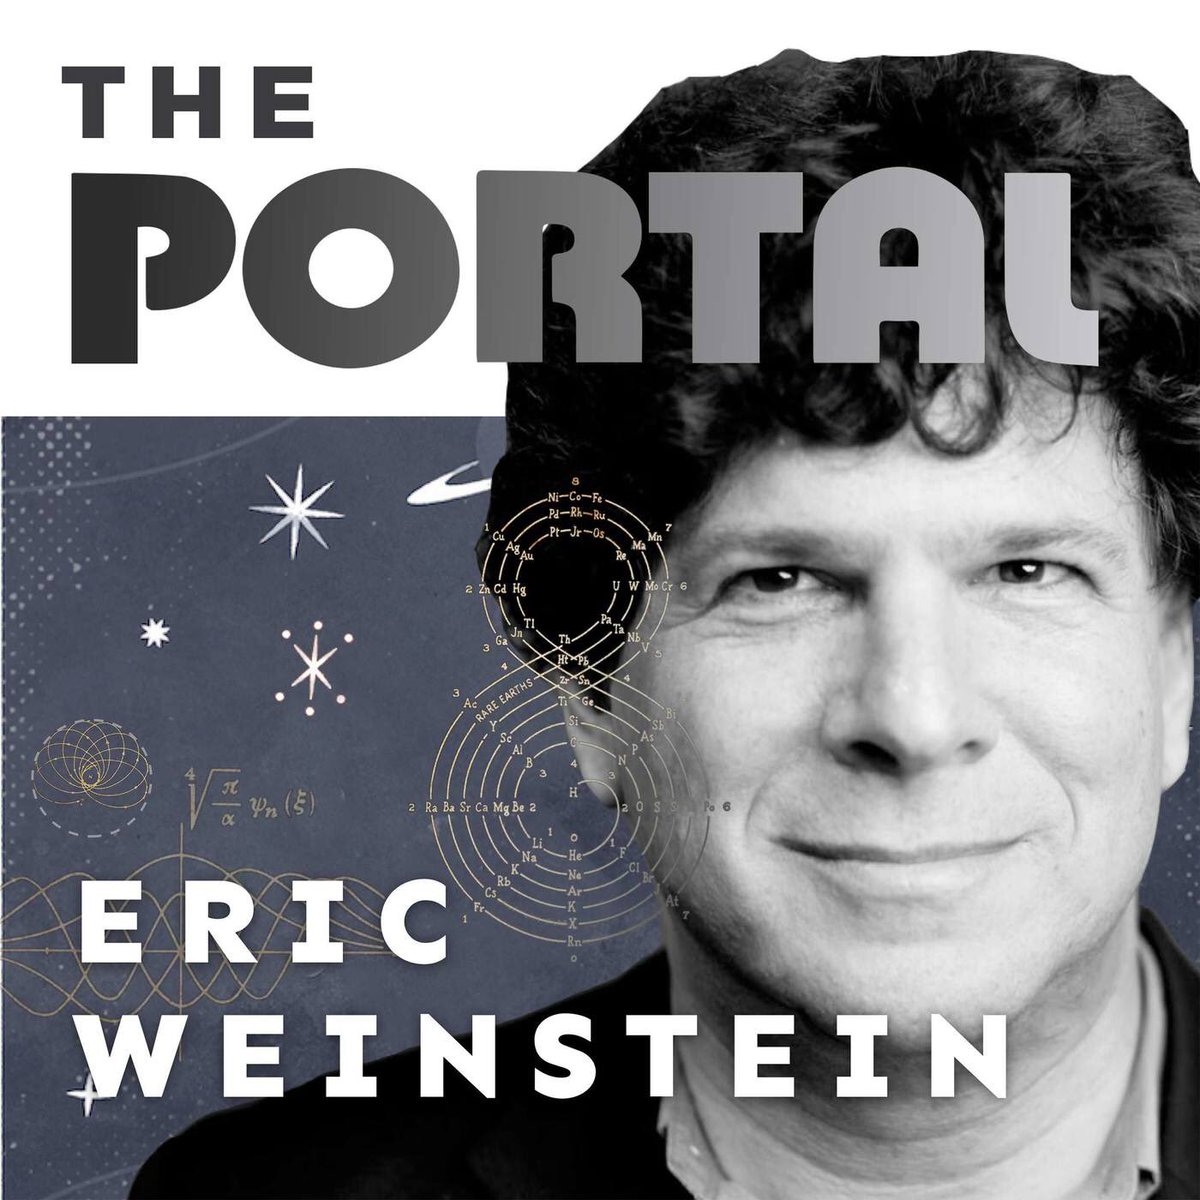 The DISC is only one of these marvelous ideas that Eric explores in his podcast called The Portal where he explores subjects including science, economics, culture, politics, and business. Let’s visit The Portal!